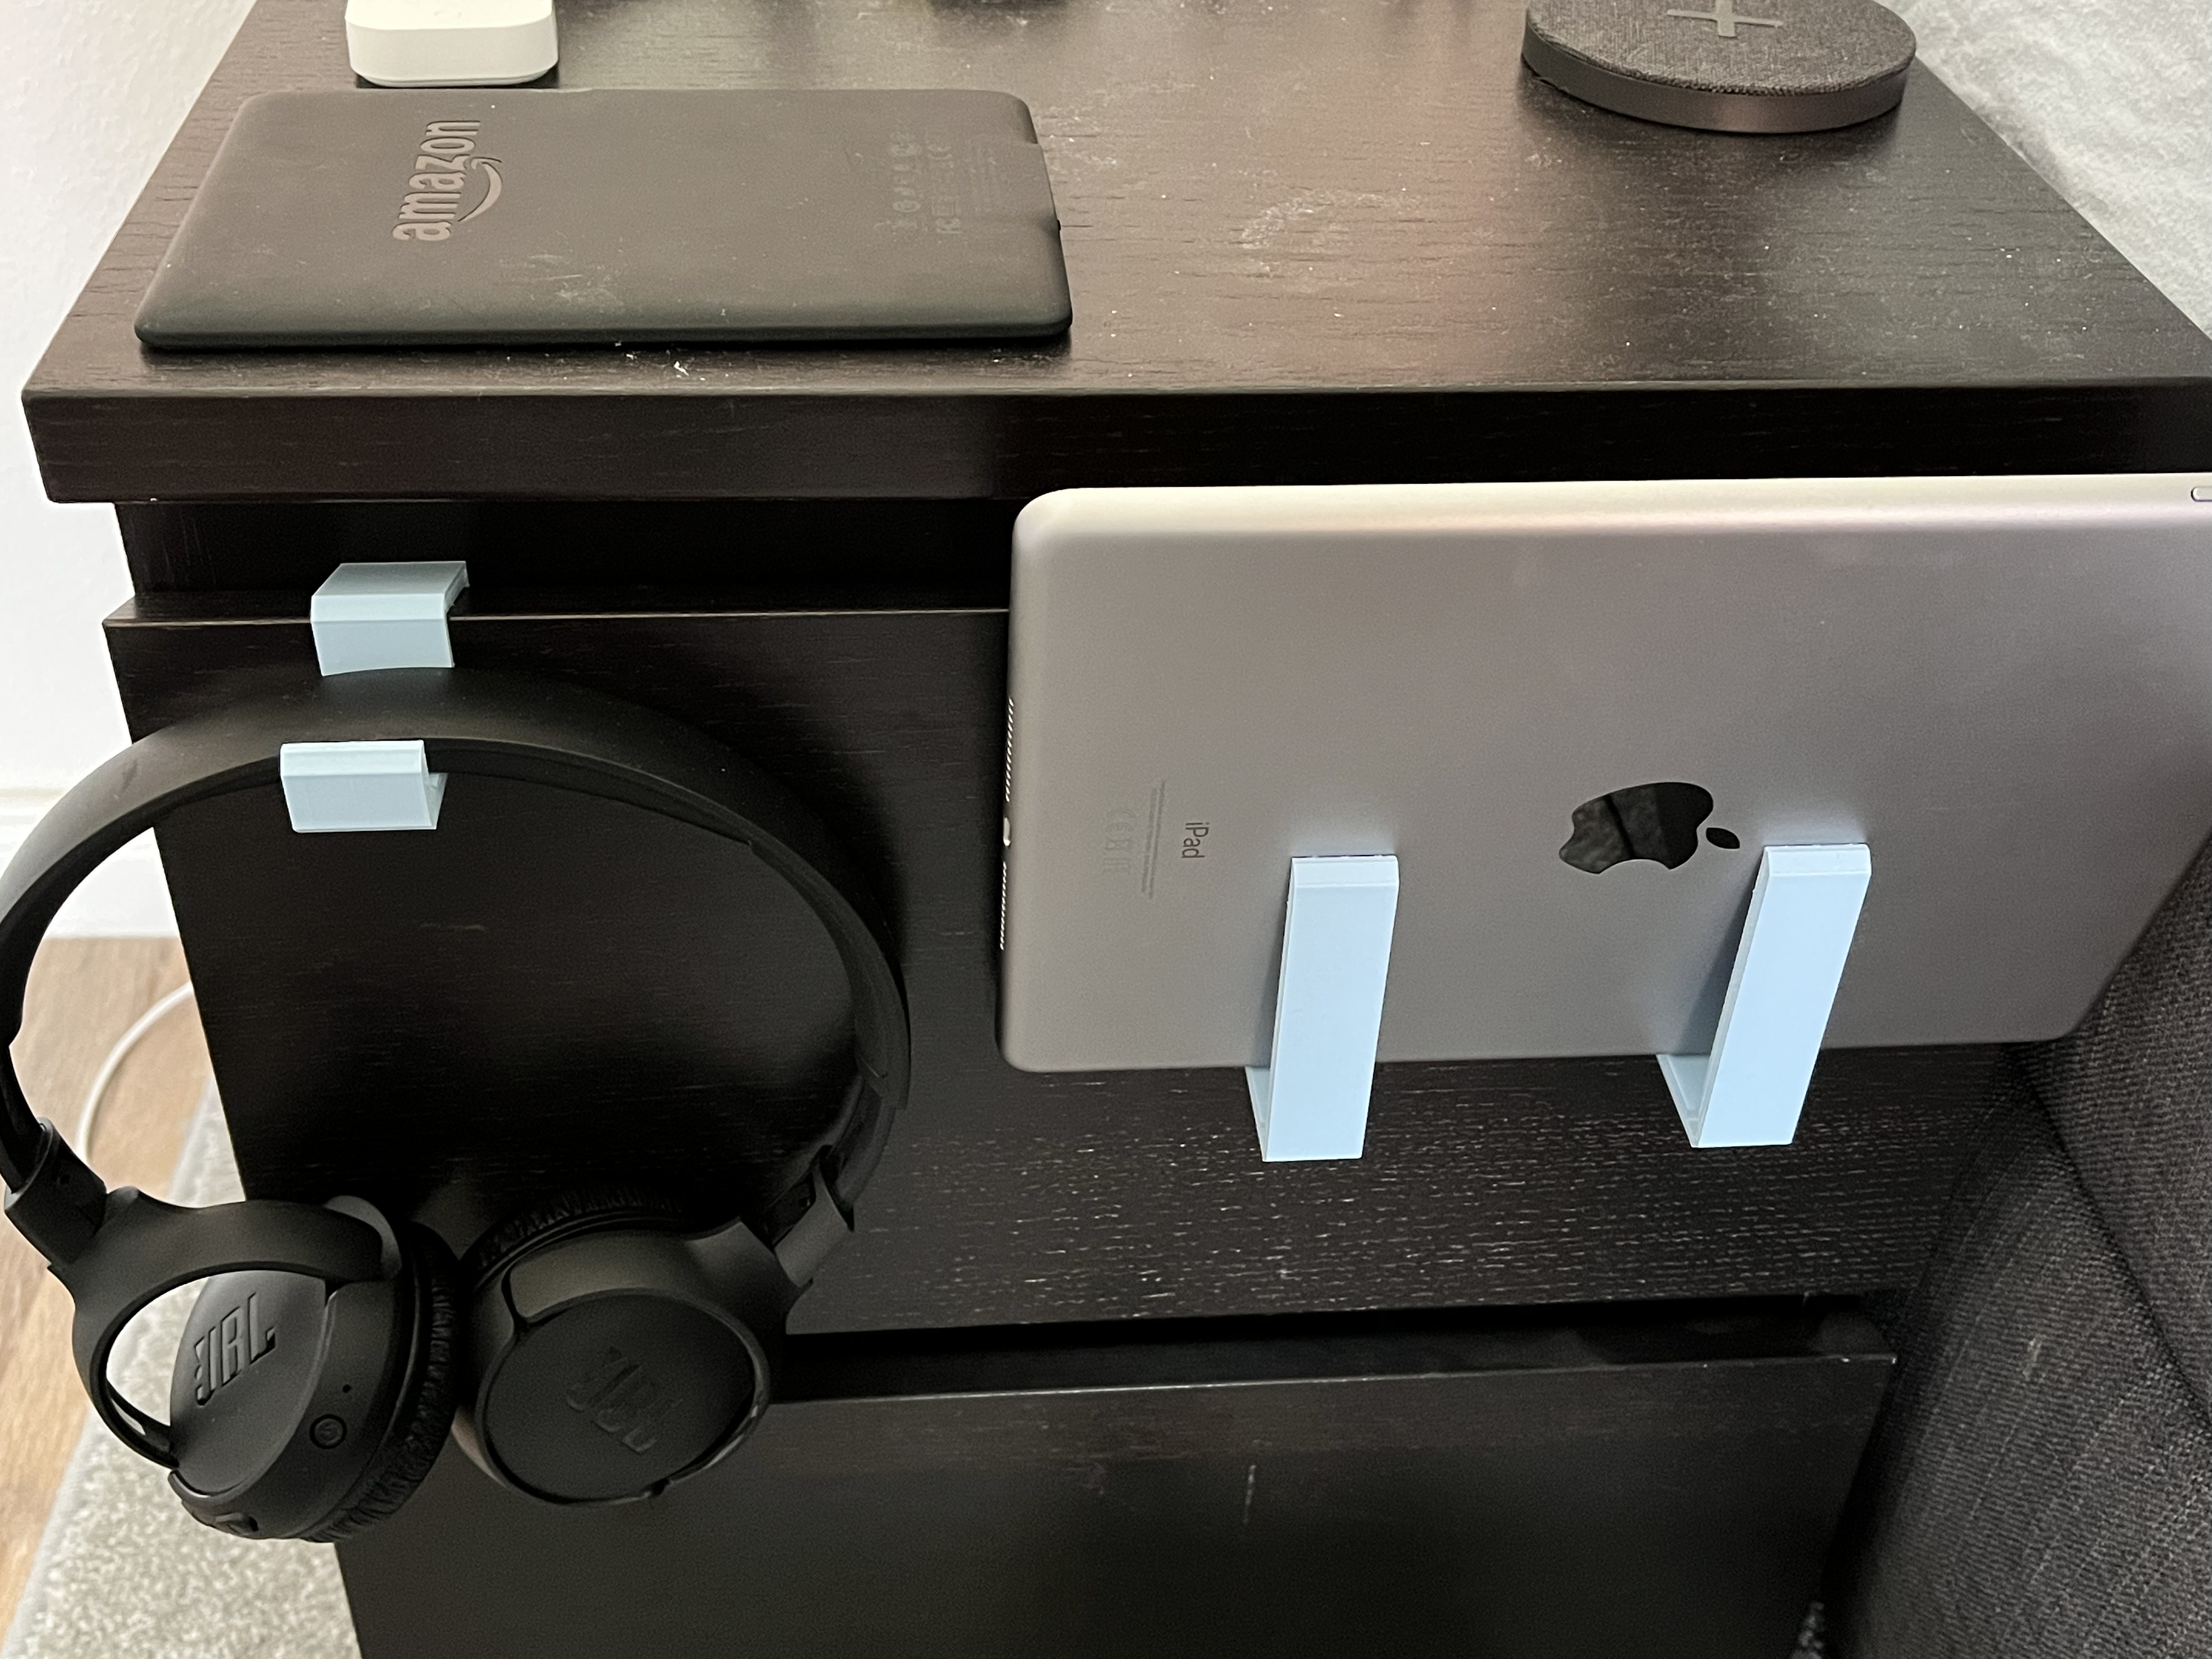 Tablet and Headphone Holder for IKEA Malm Nightstand